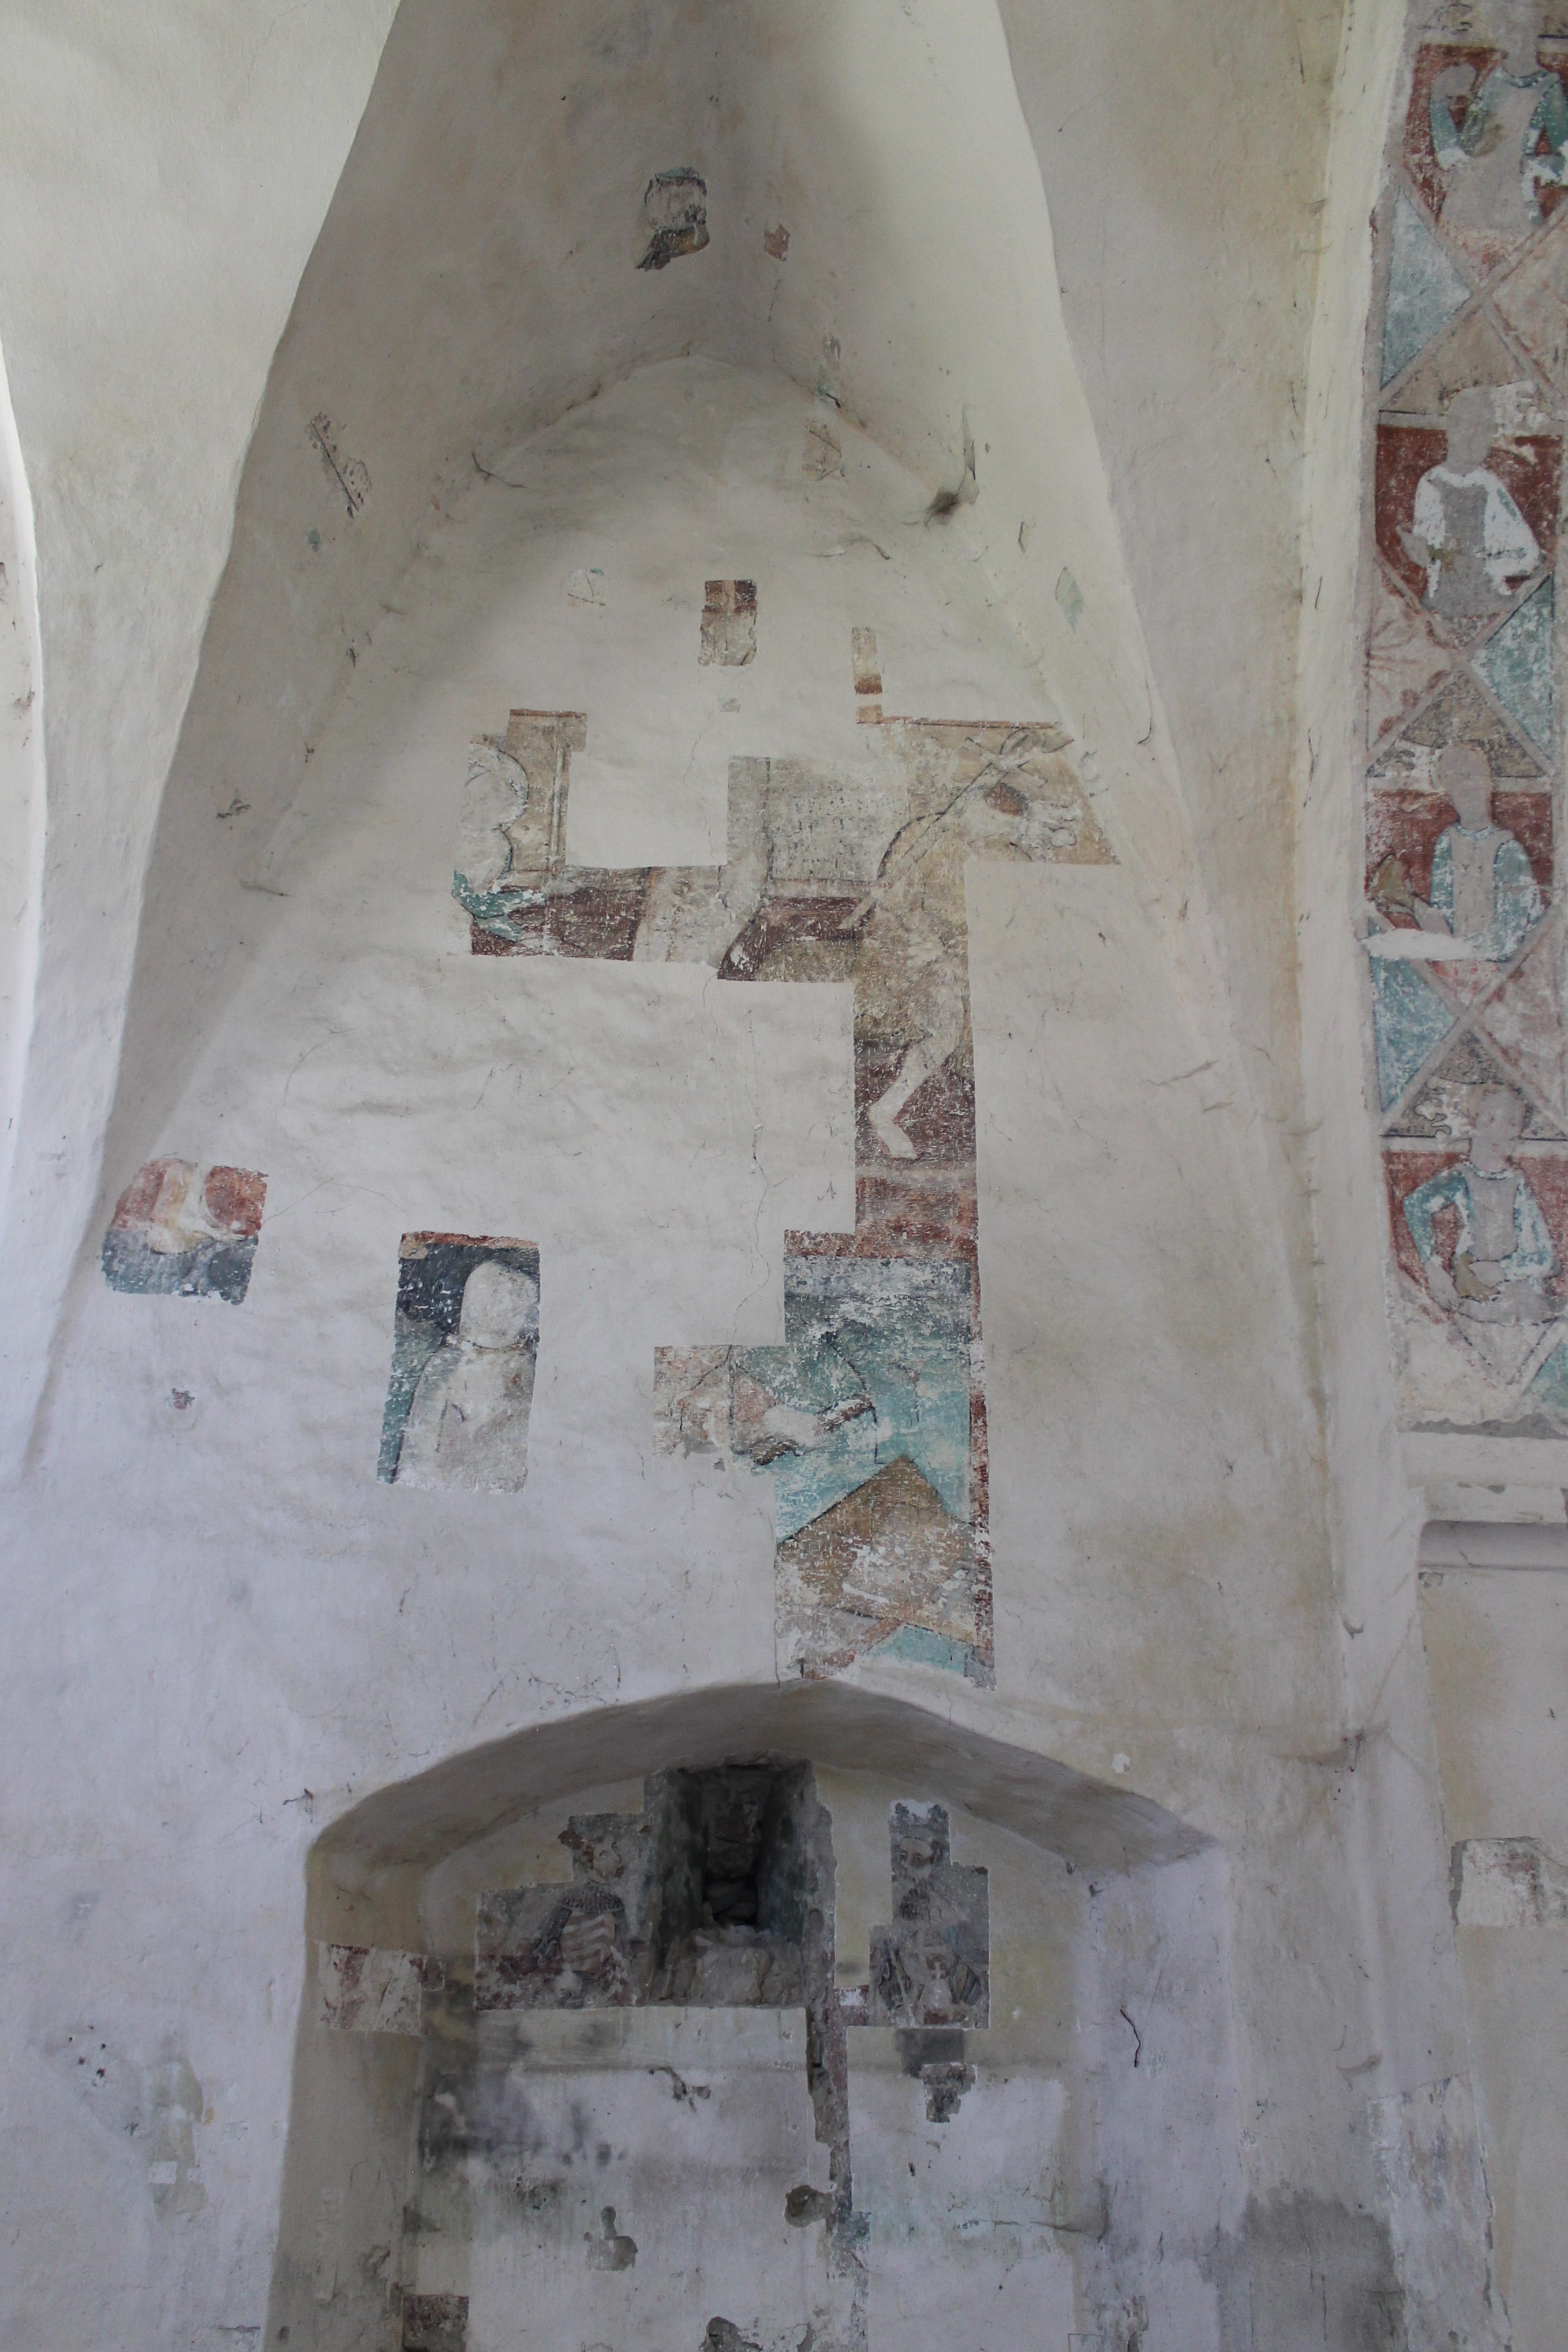 Sts. Stephen and Ladislas in the sedilia, surmounted by the ‘Living Cross’, frescoes in the process of restoration, the Evangelical church at Șmig, Romania, 15th century (source: M. Anghel)